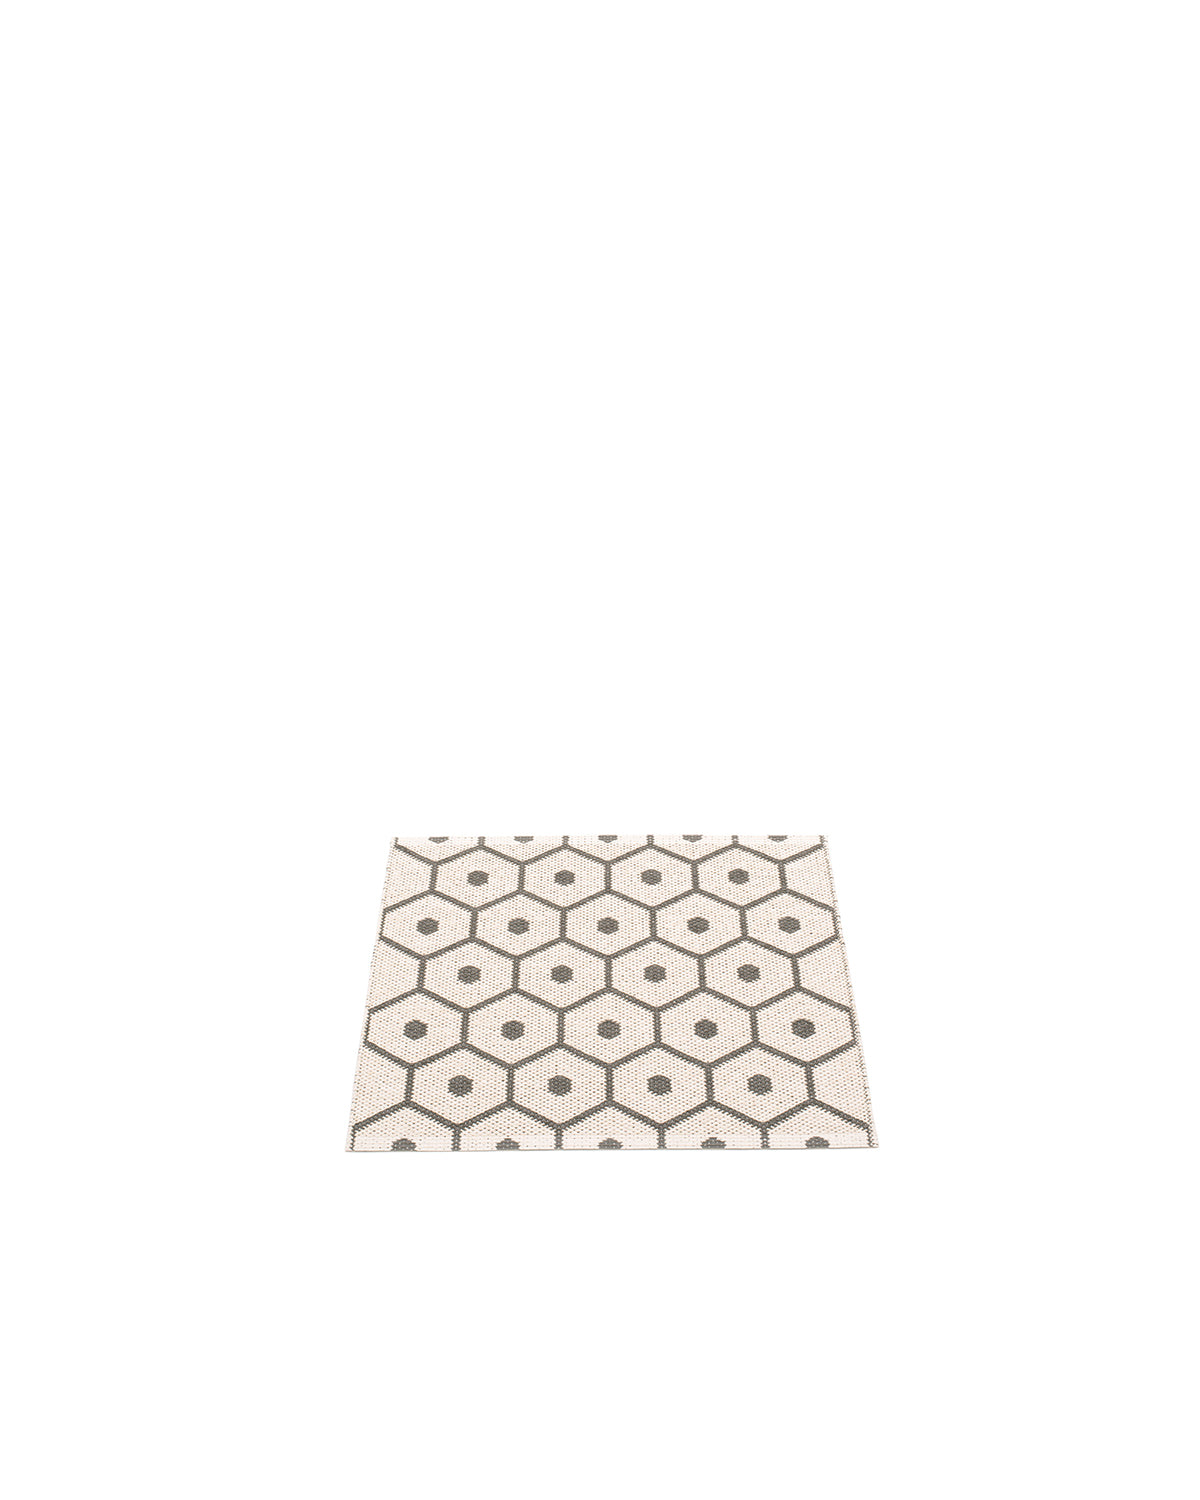 Pappelina Rug HONEY Charcoal  image 8